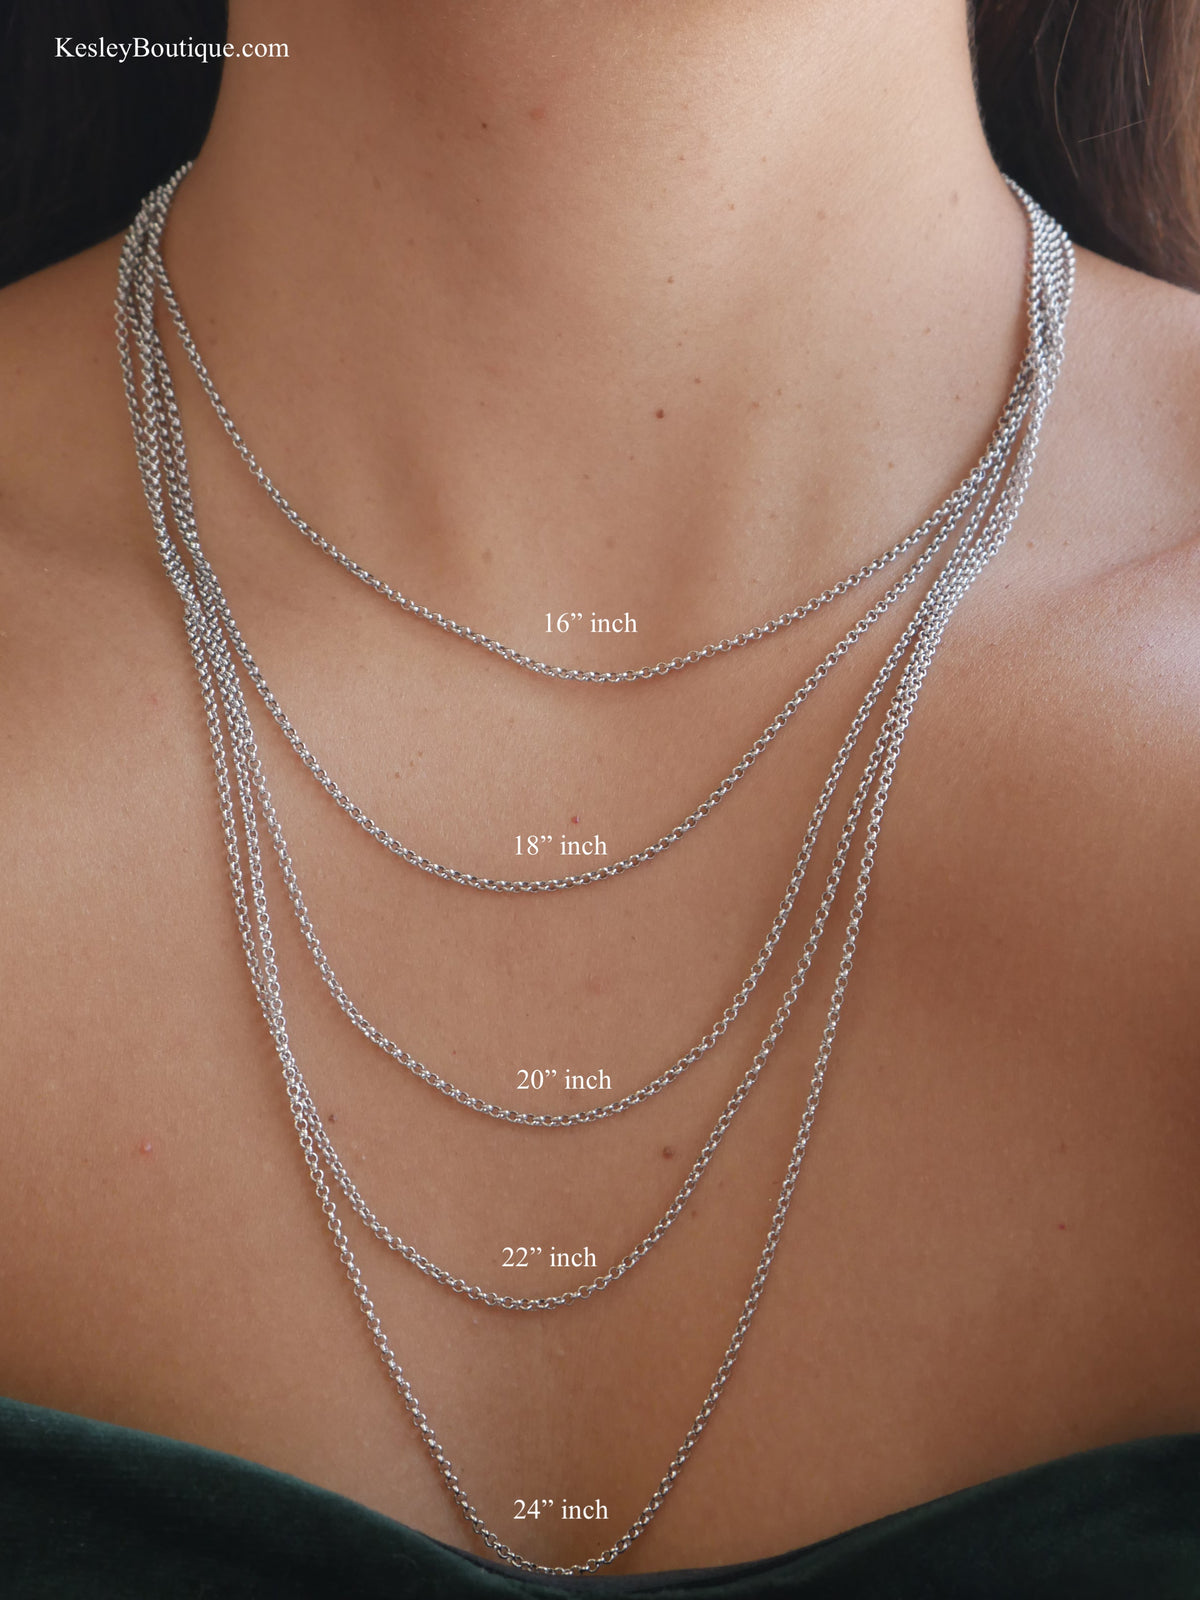 necklace length.how long is a 22 inch chain. How long is a 22 inch chain. how long is a 24" inc chain, how long is a 24" inch chain, how long is a 24 inch chain. single chain for pendant for men and woman. single neclace chains. plain necklace chains in white gold sterling silver .925. Jewelry store in Brickell. Jewelry store in Miami. Kesley Boutique 